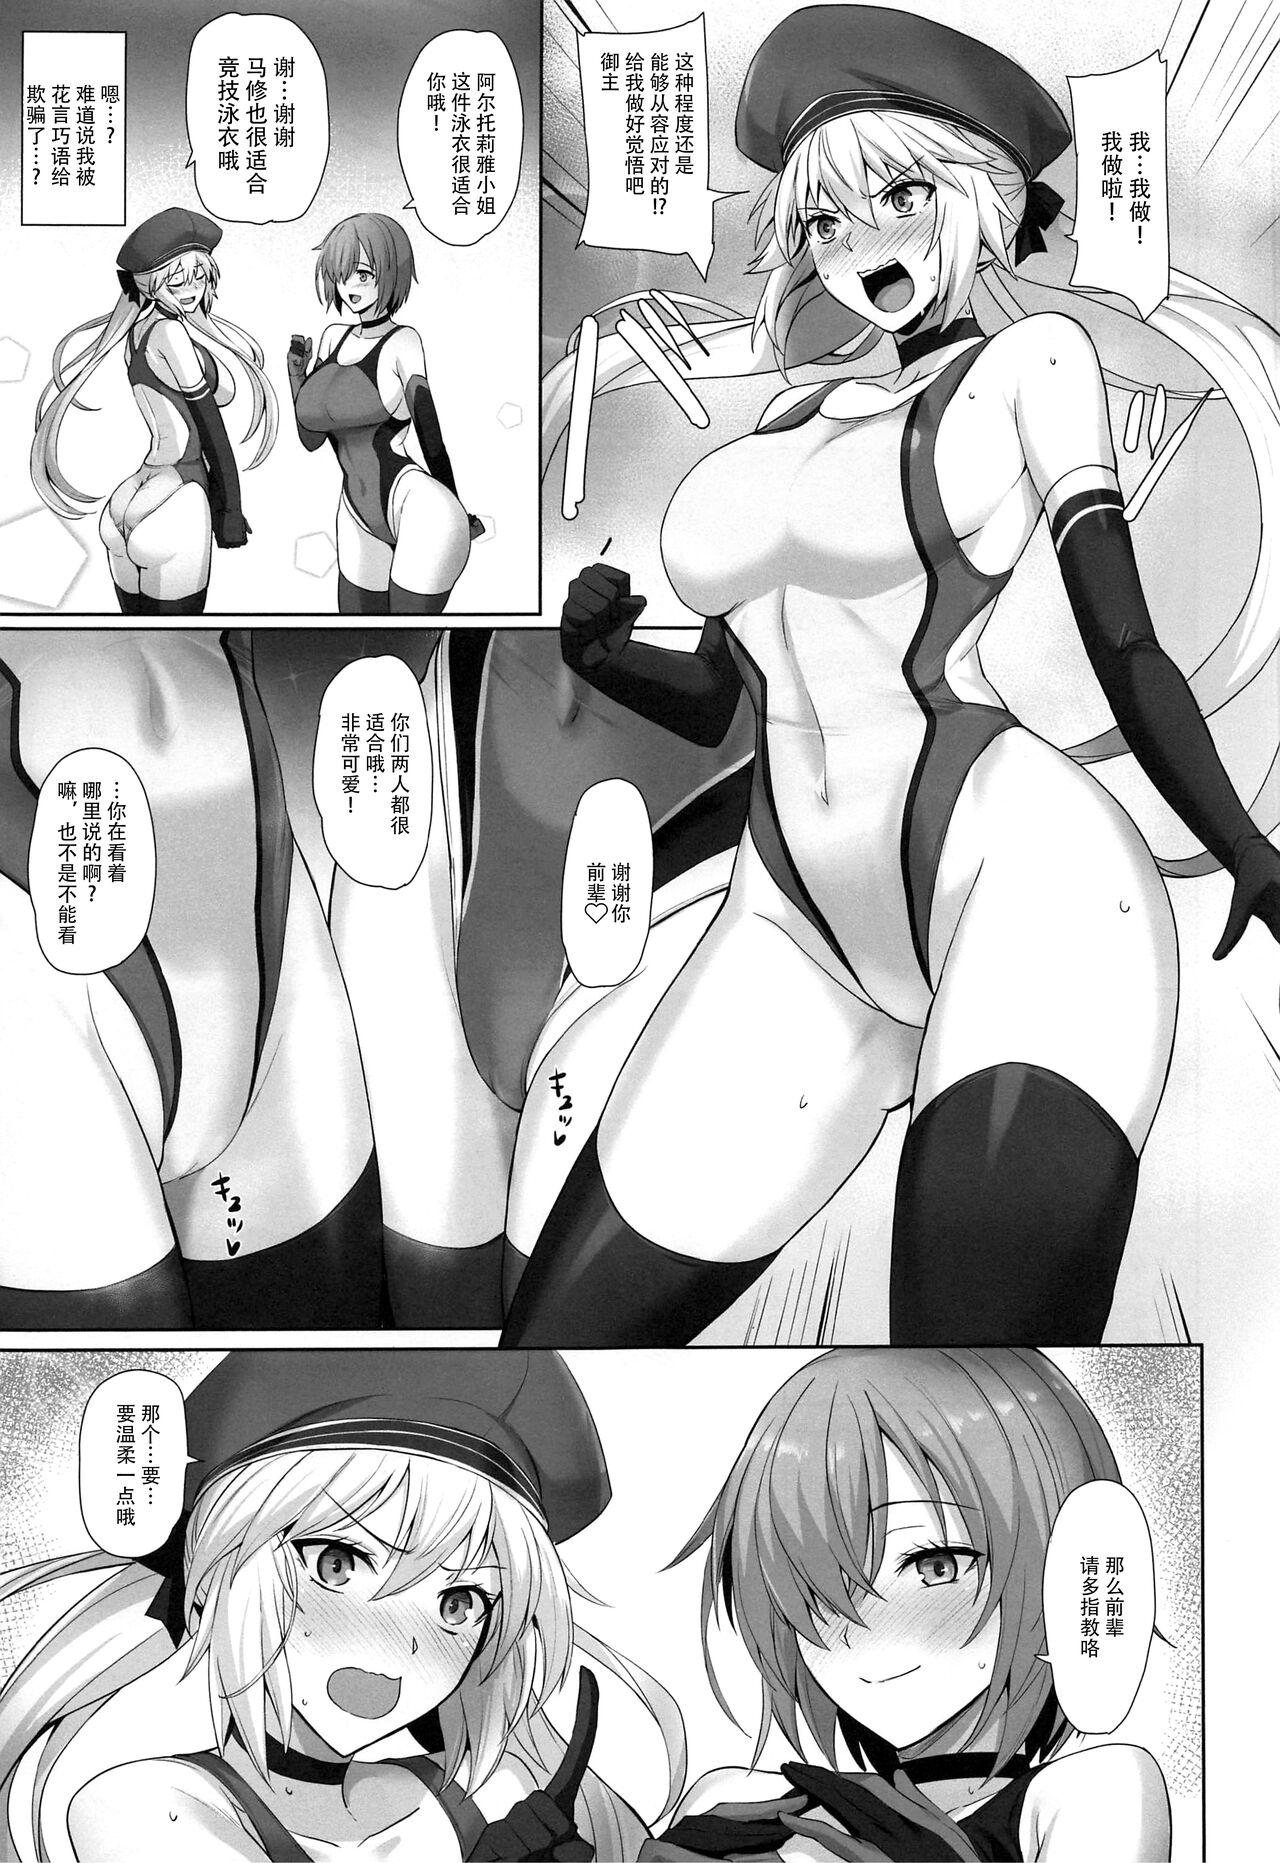 Maid Kyouei Tokusei no Servant to 2 - Fate grand order Livesex - Page 4